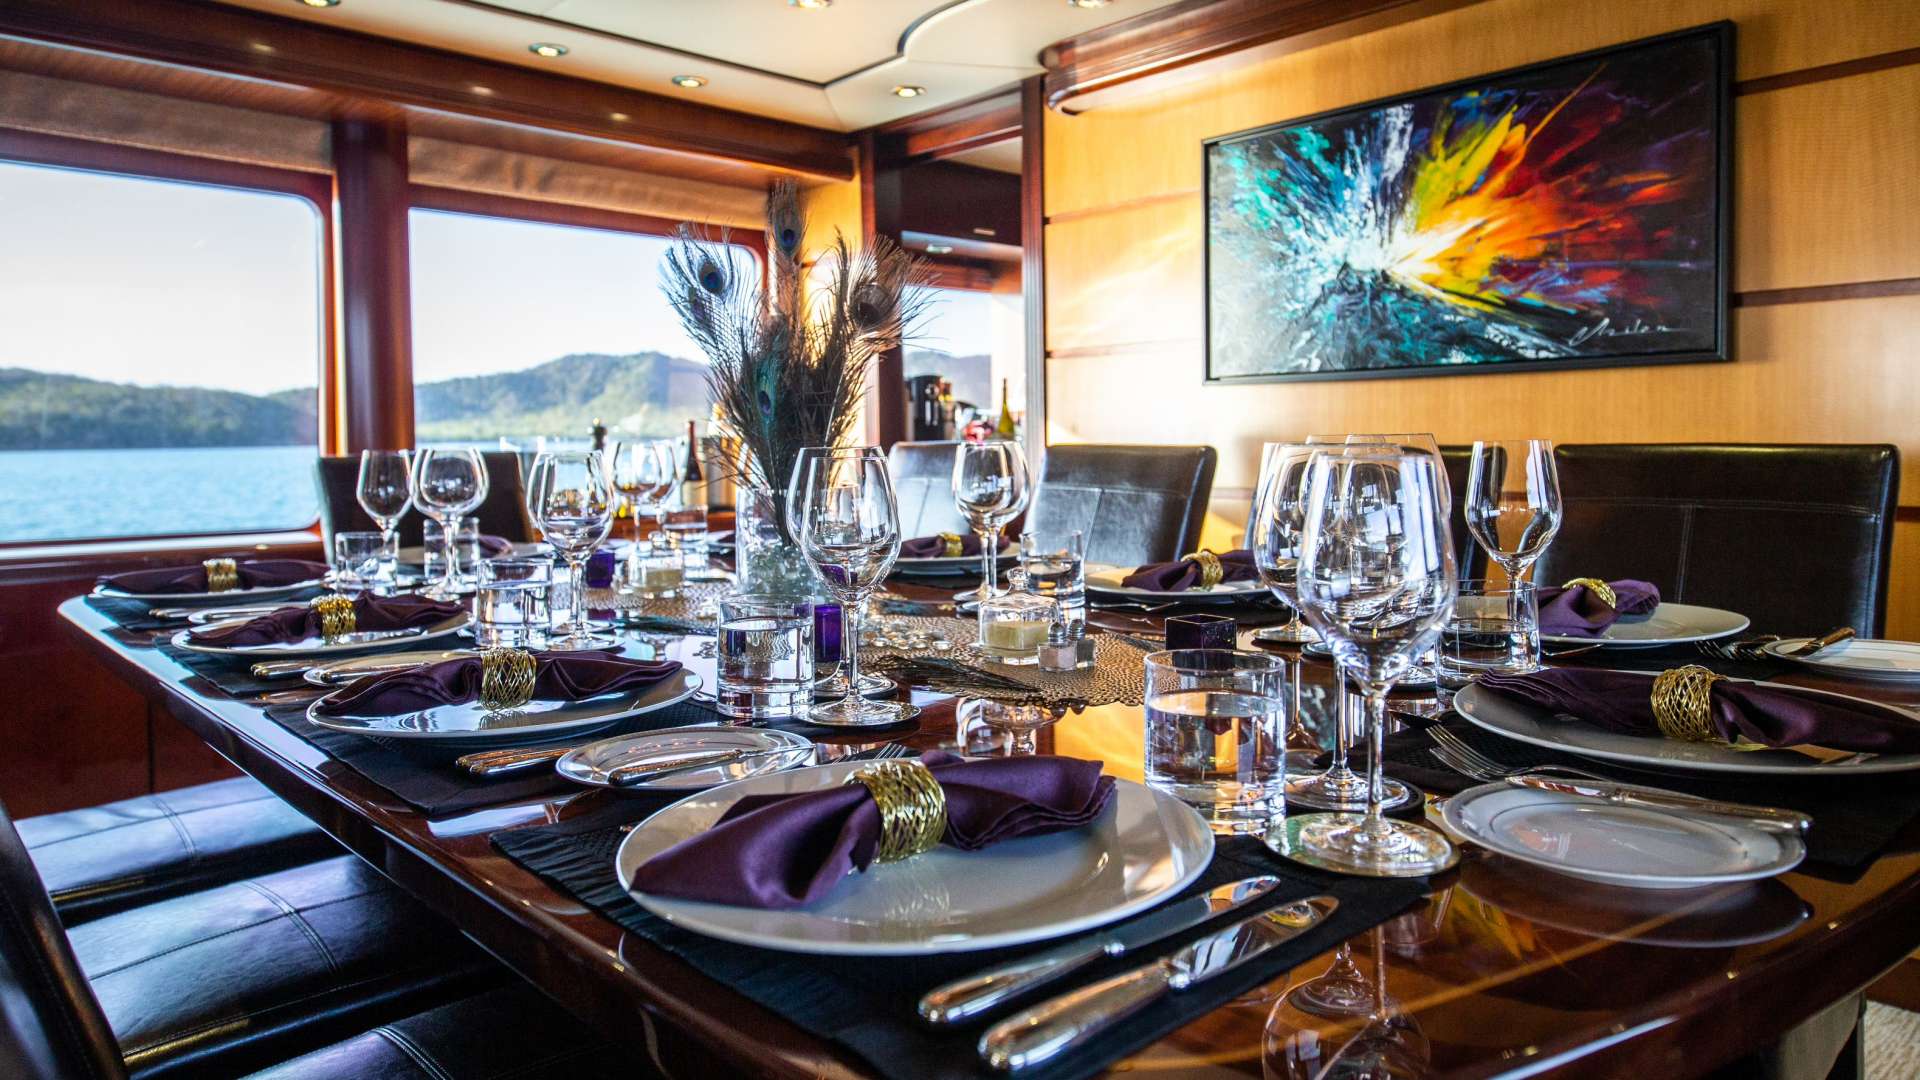 Motor Yacht 'JUST ENOUGH' Dining Area, 11 PAX, 9 Crew, 141.00 Ft, 43.00 Meters, Built 2012, ., Refit Year 2018